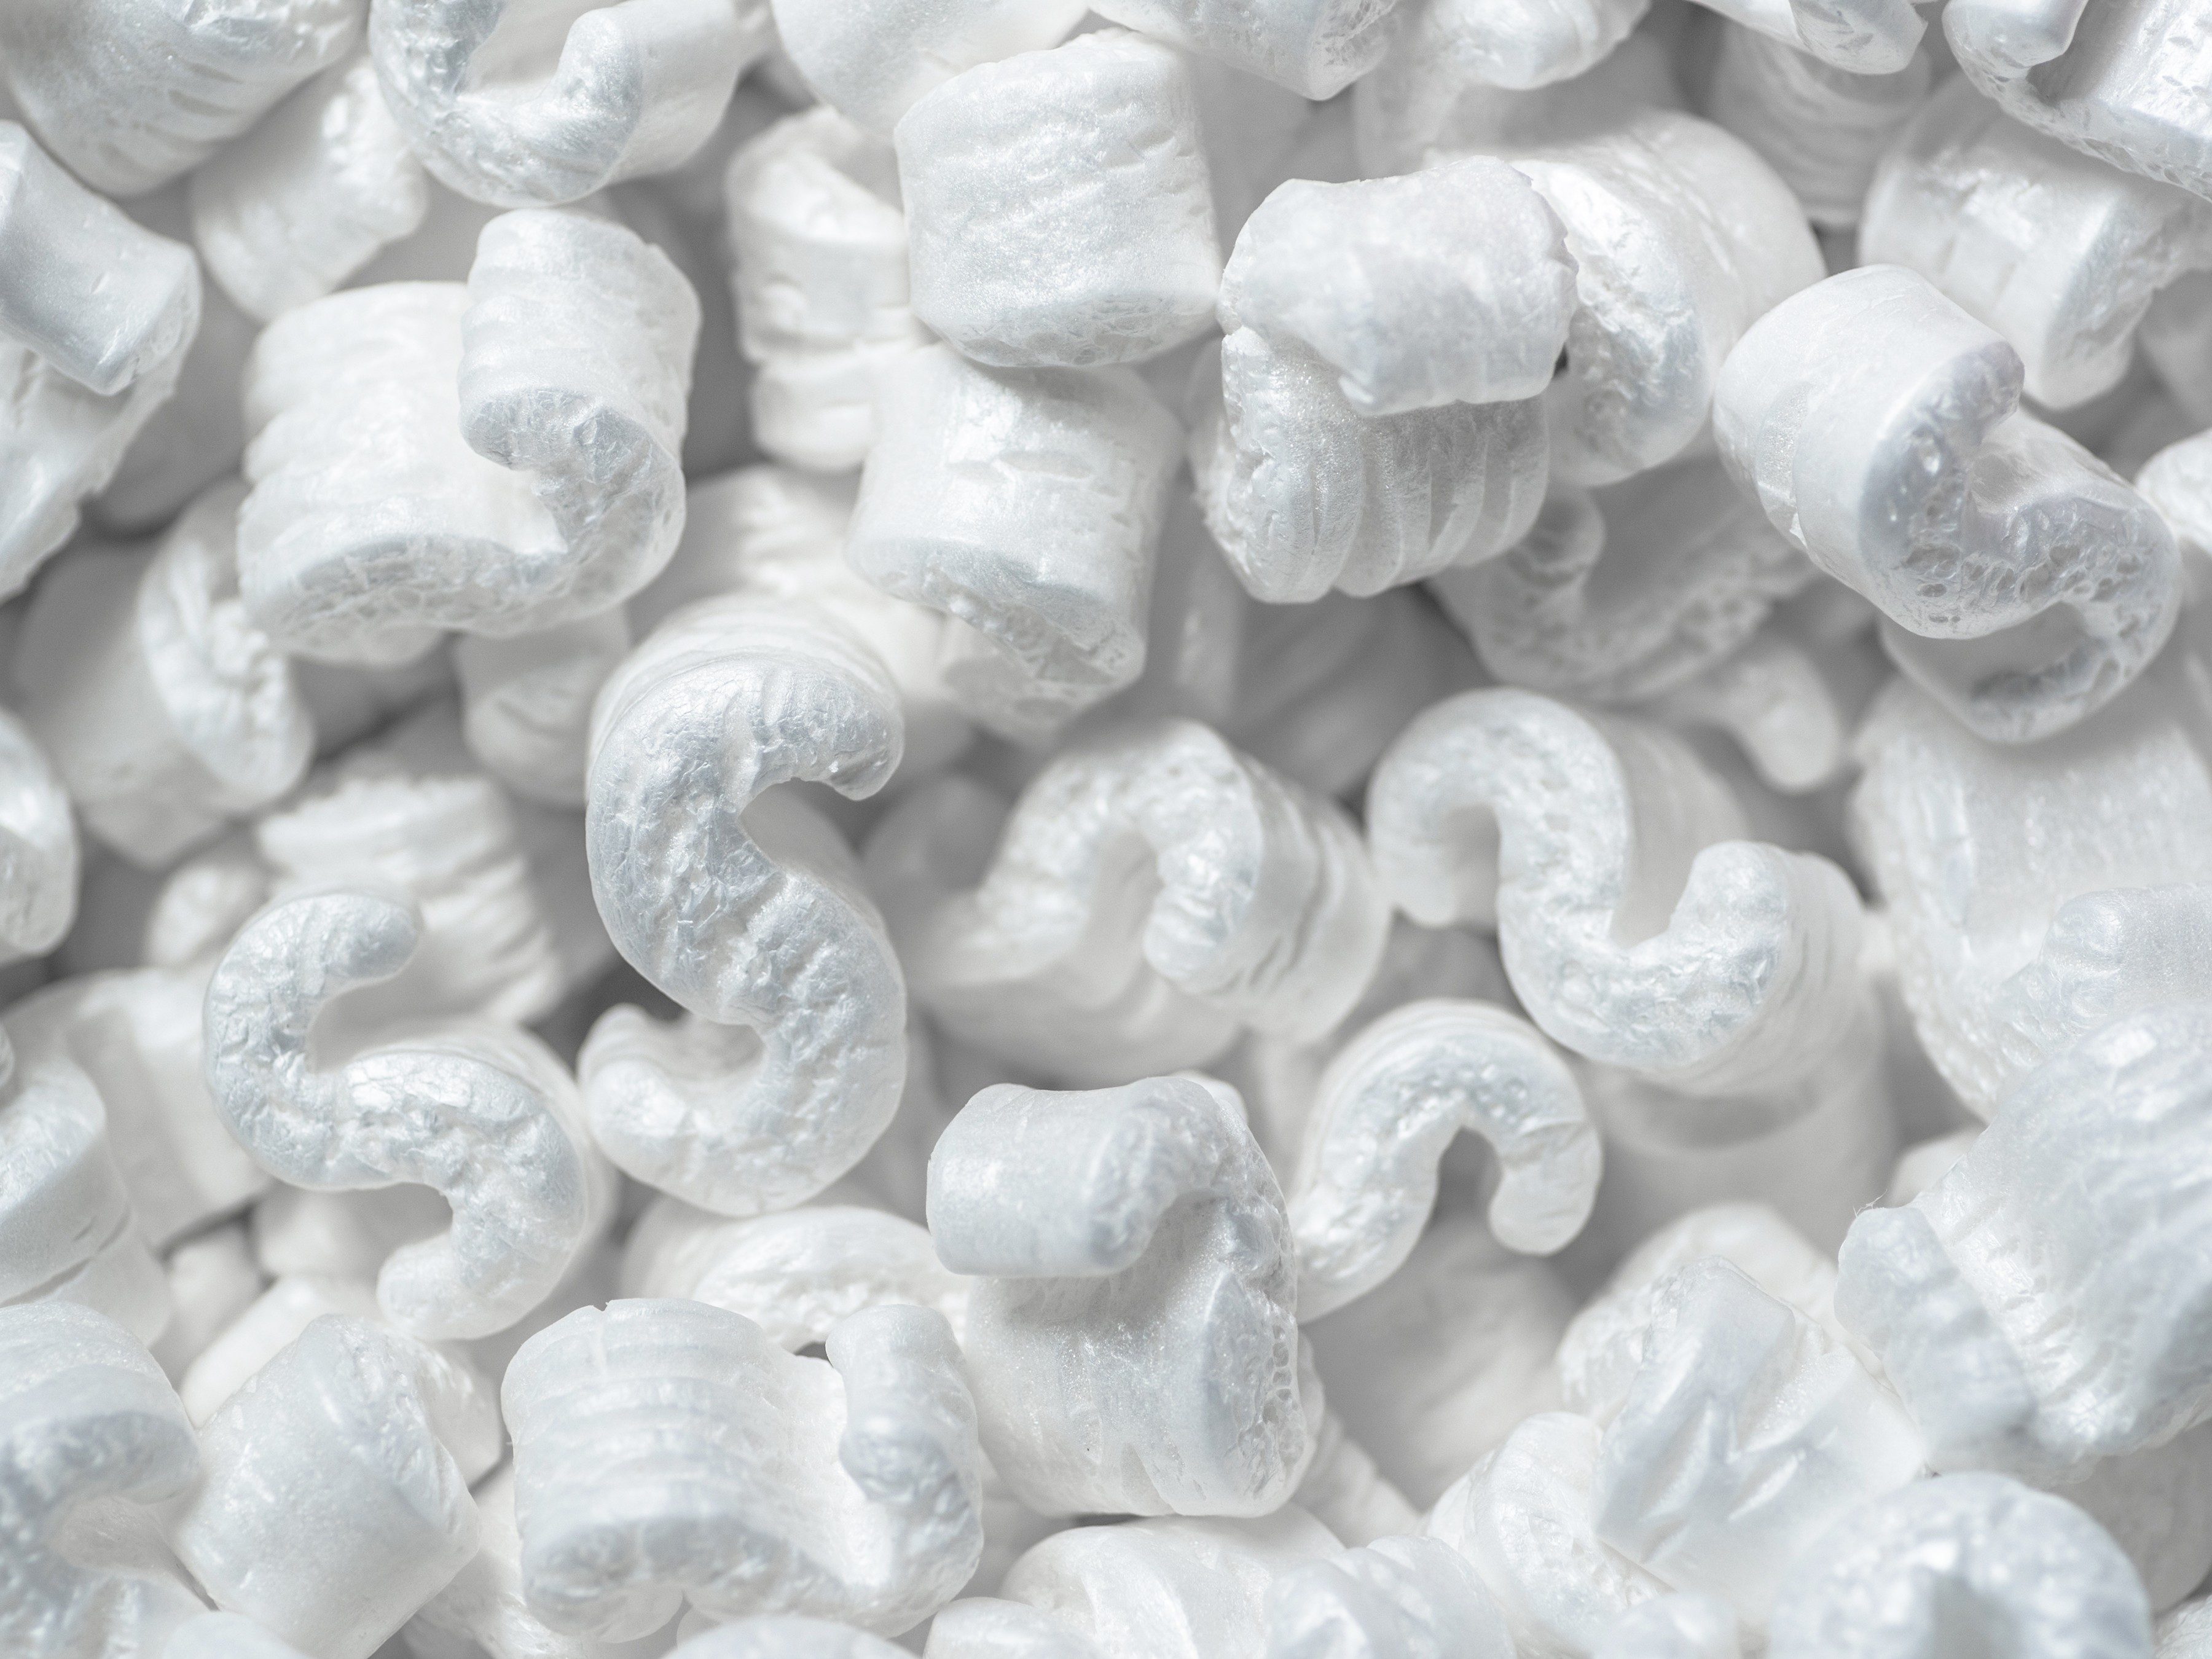 chips polystyrene, chips polystyrene Suppliers and Manufacturers at